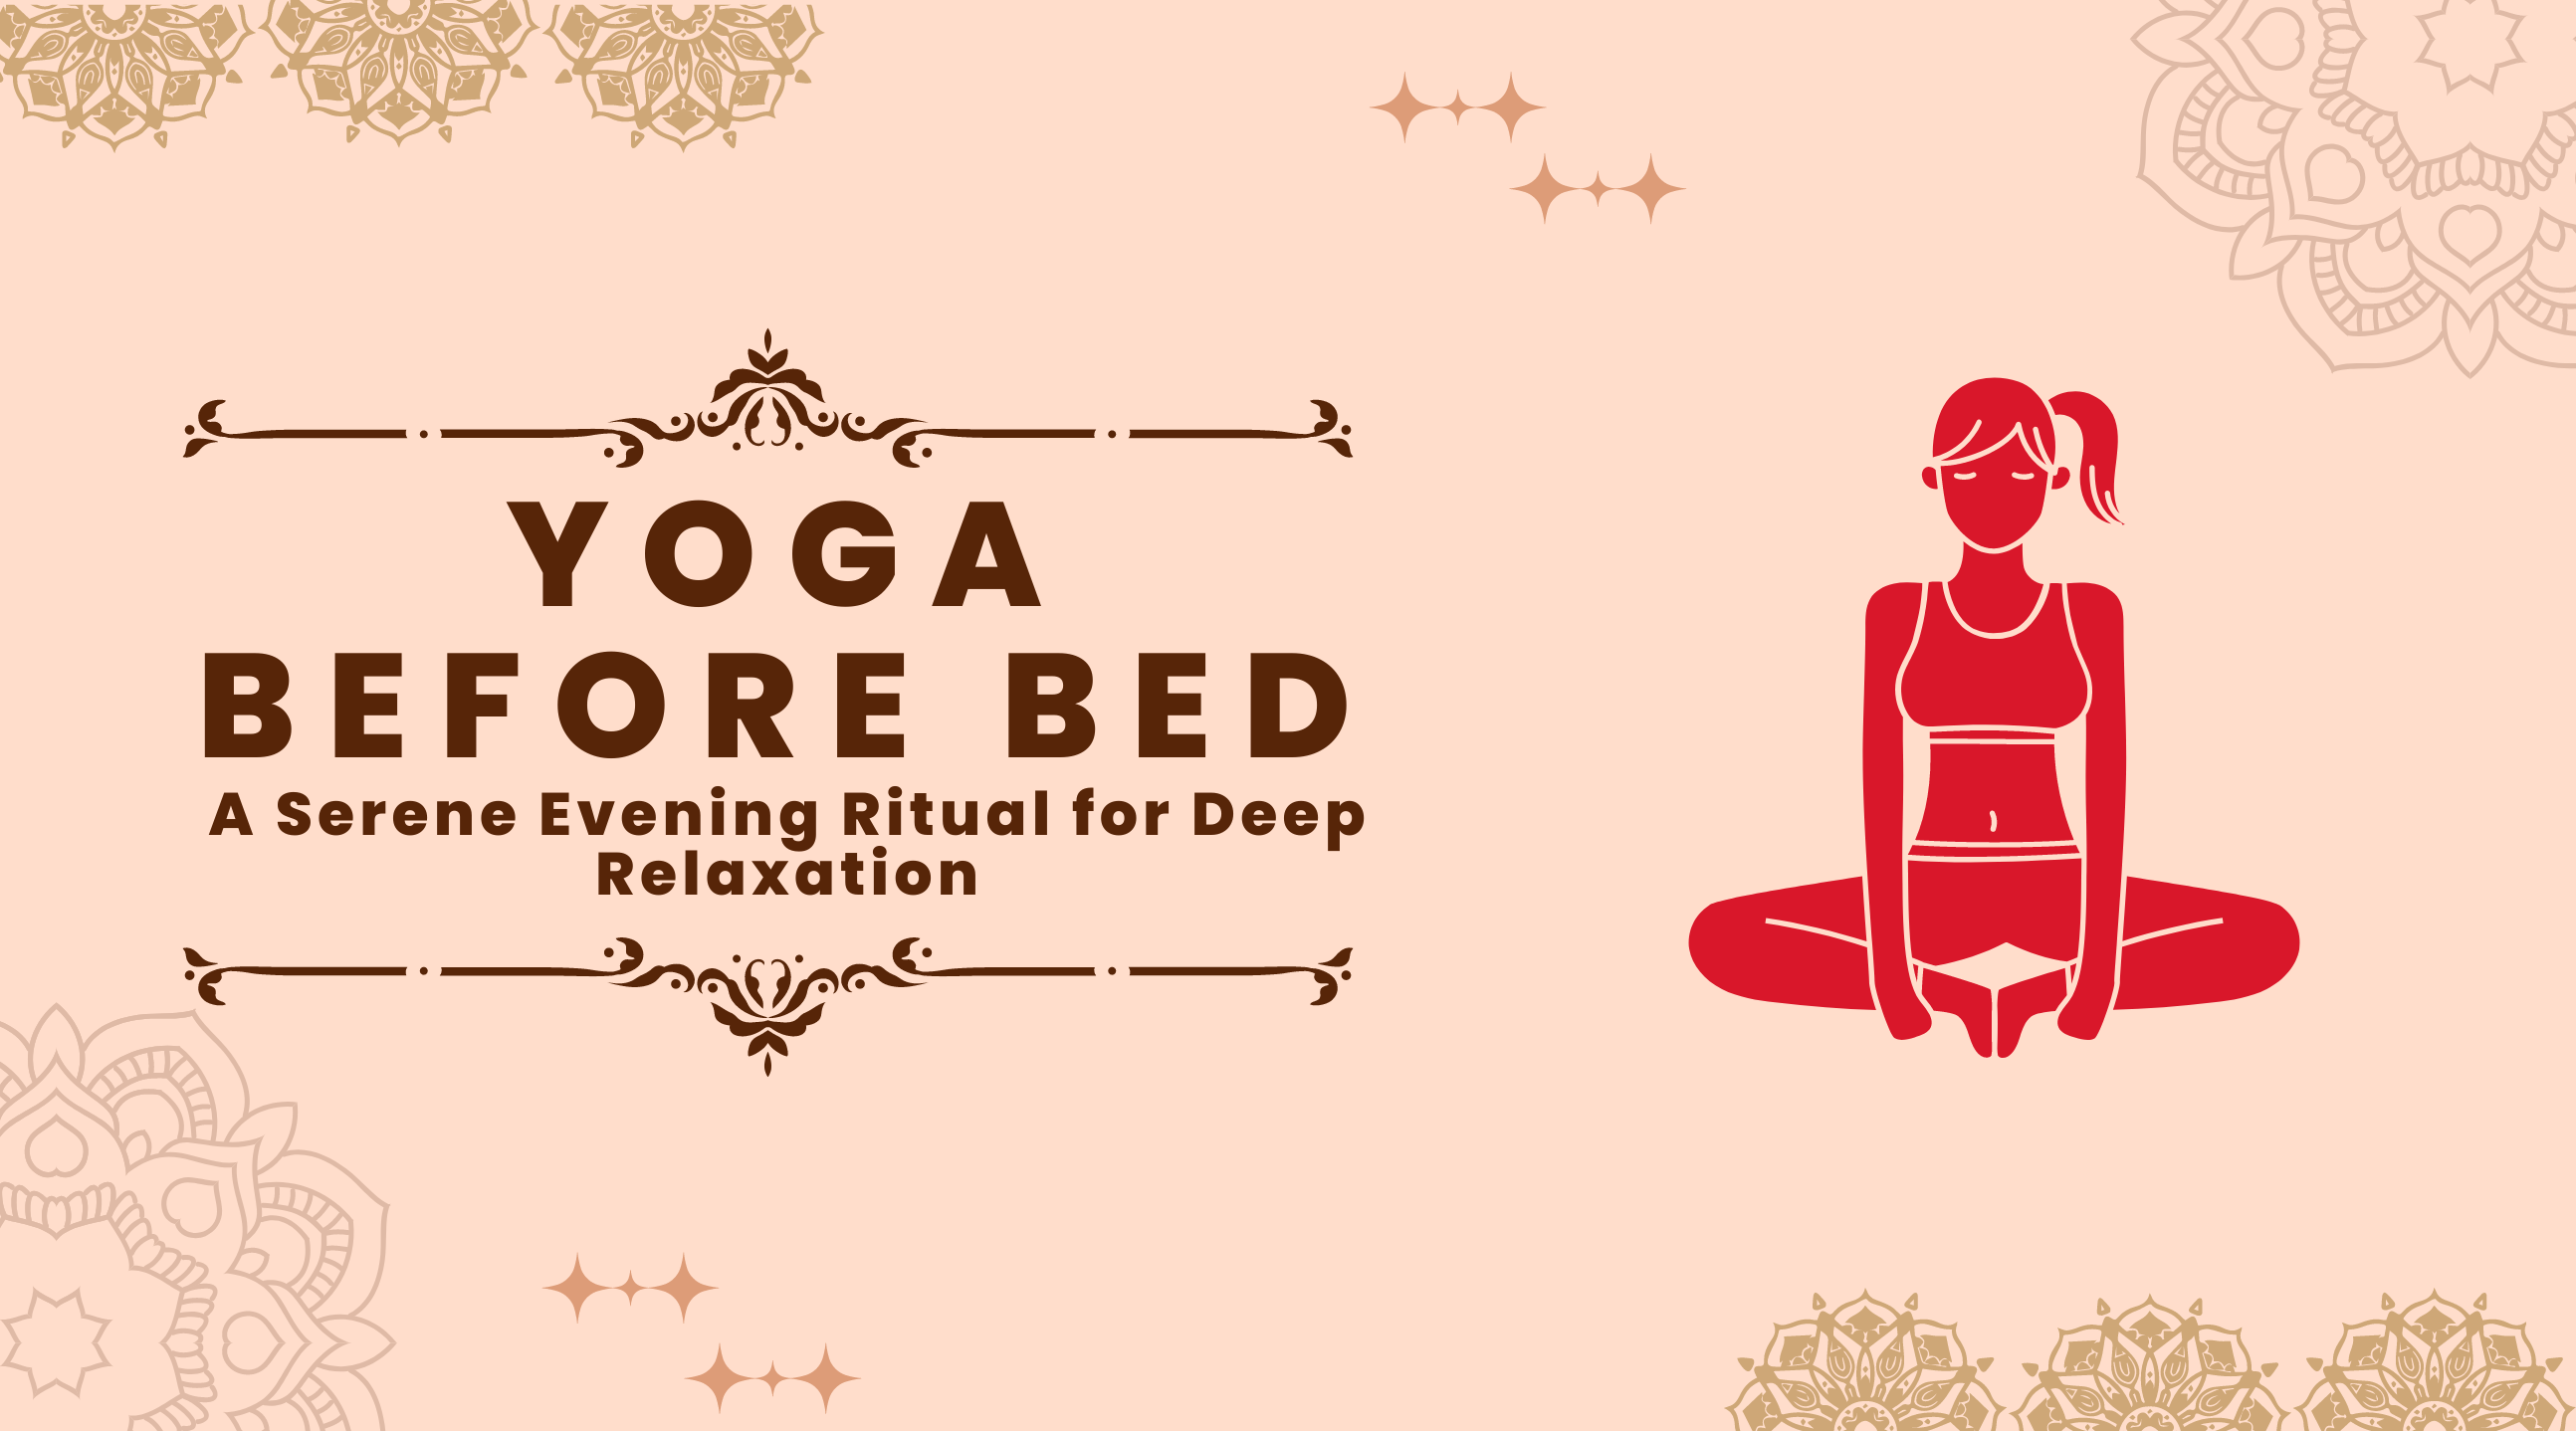 Yoga Before Bed: A Serene Evening Ritual for Deep Relaxation